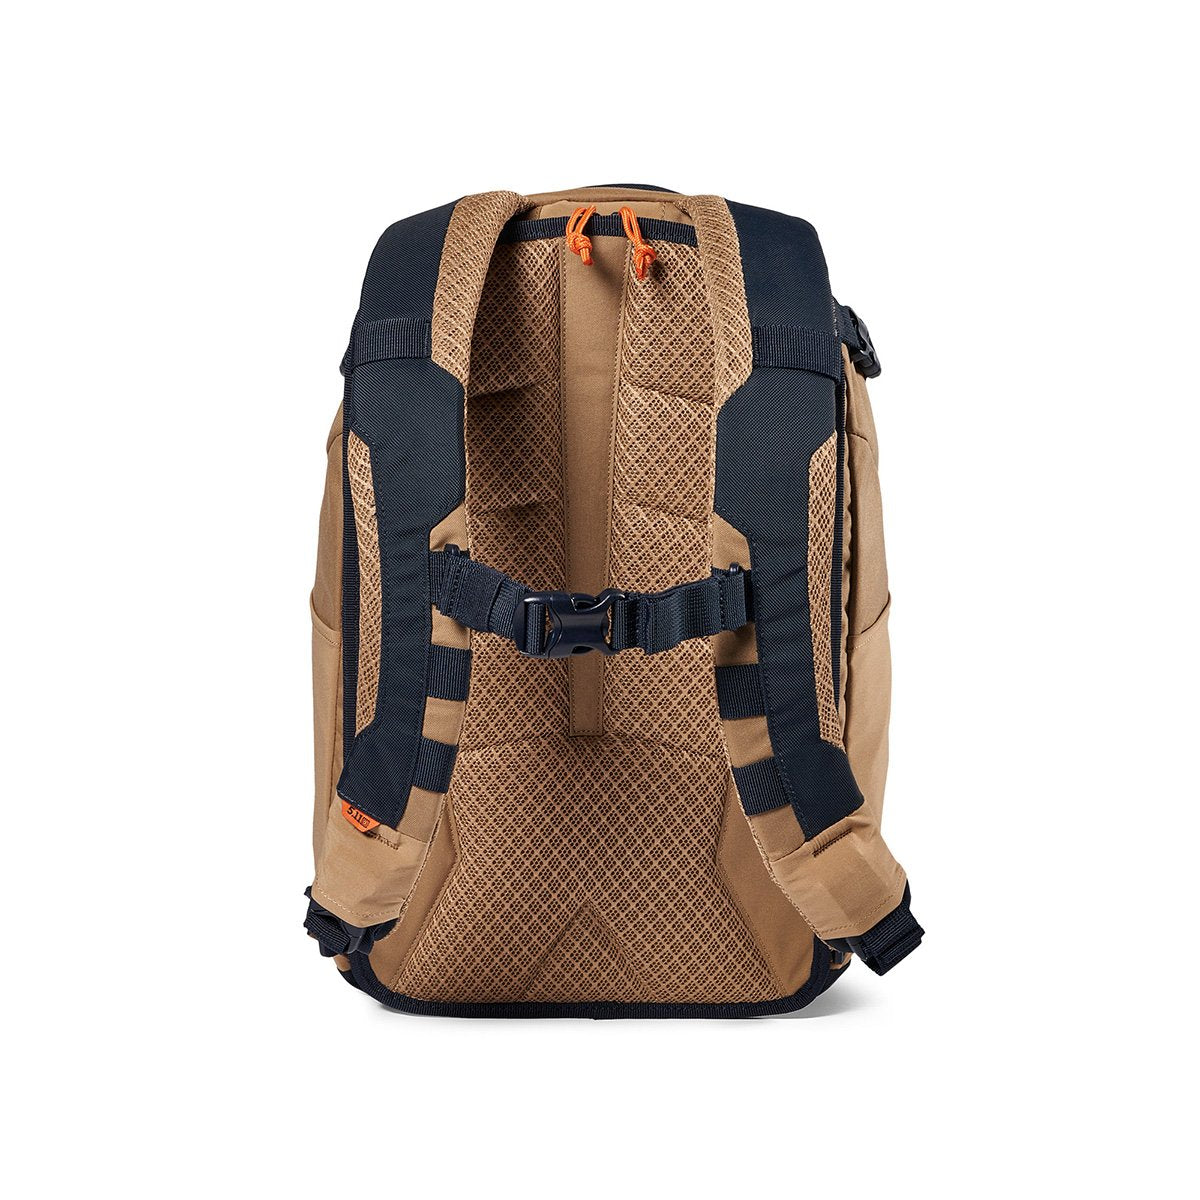 5.11 Tactical COVRT18 2.0 Backpack 32L Bags, Packs and Cases 5.11 Tactical Tactical Gear Supplier Tactical Distributors Australia